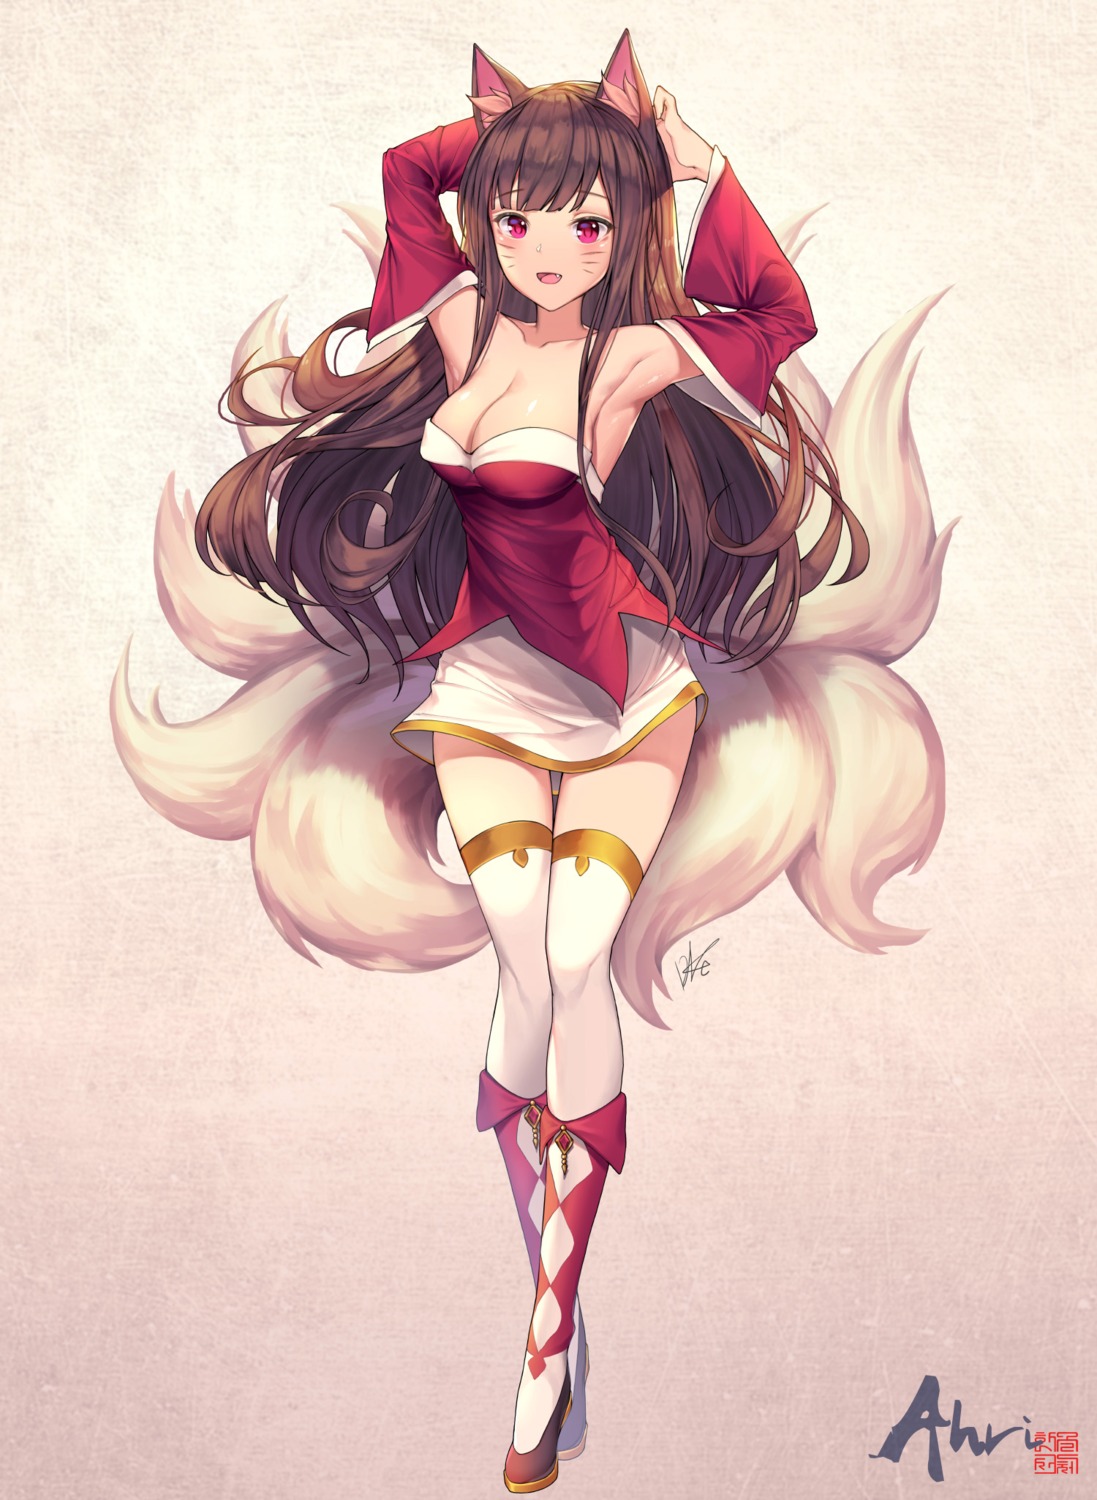 ahri animal_ears cleavage dduck_kong kitsune league_of_legends tail thighhighs